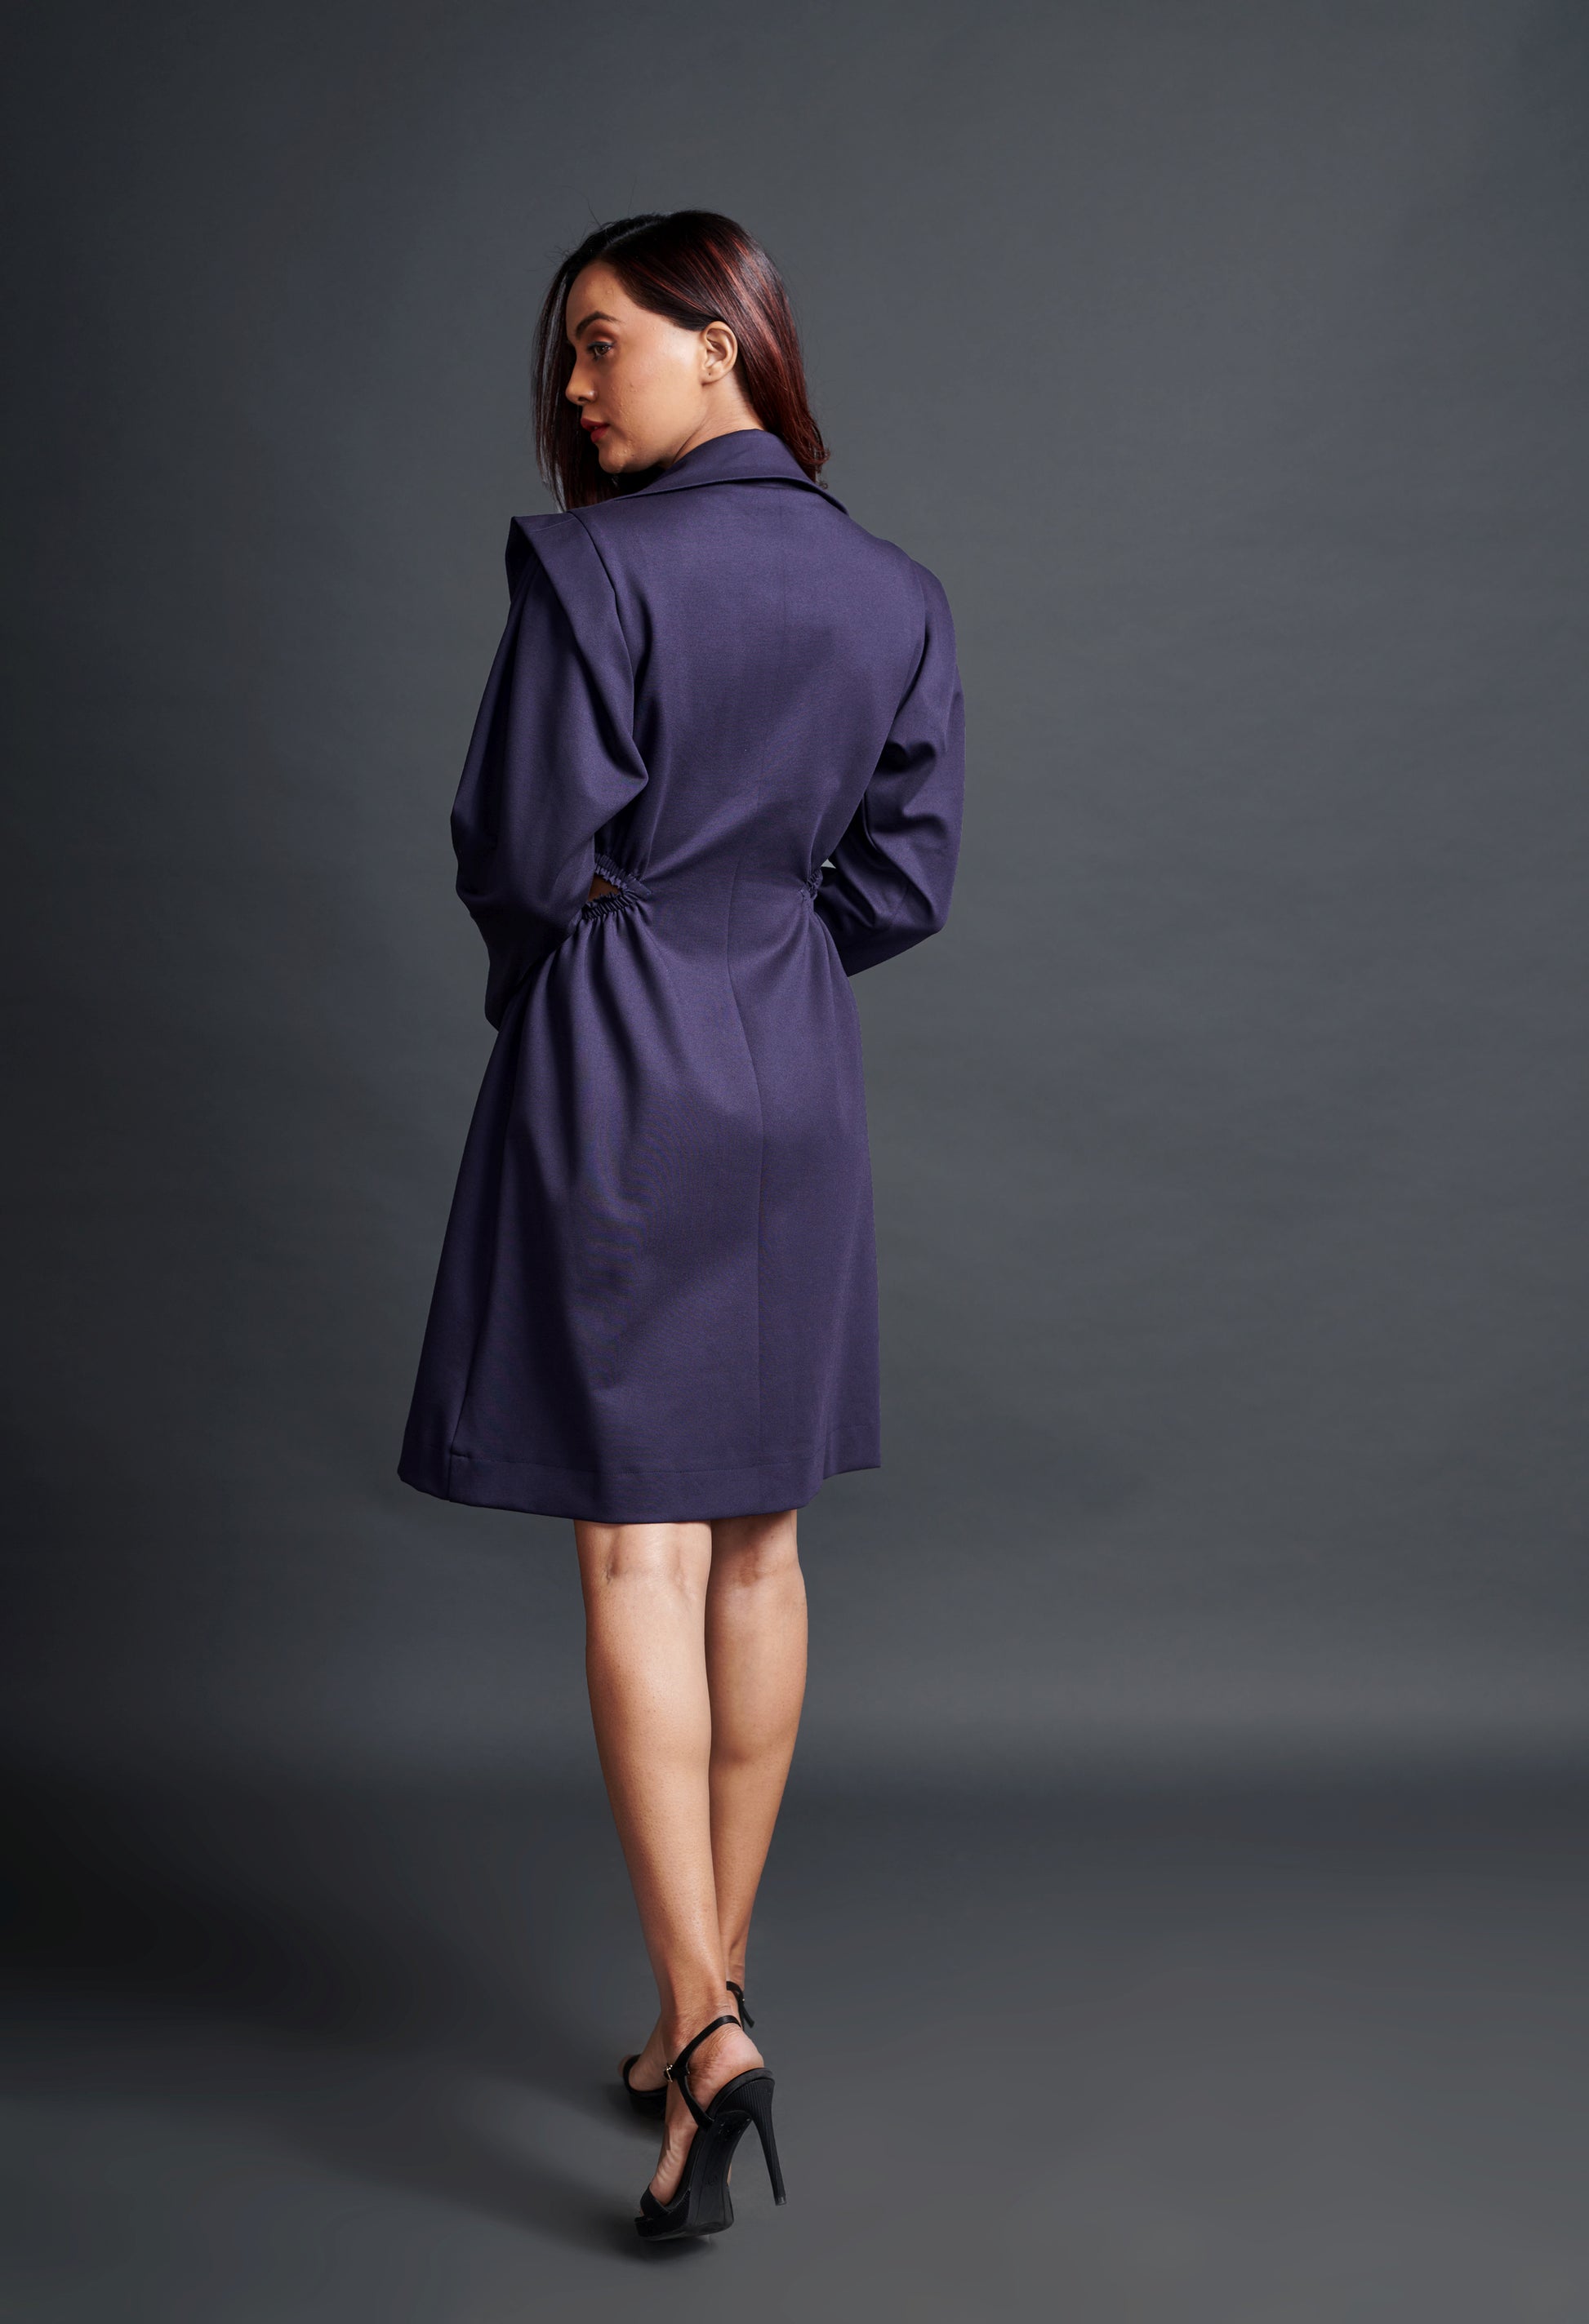 mage of PURPLE SIDE CUT JACKET DRESS WITH NEON FLOWER BELT. From savoirfashions.com